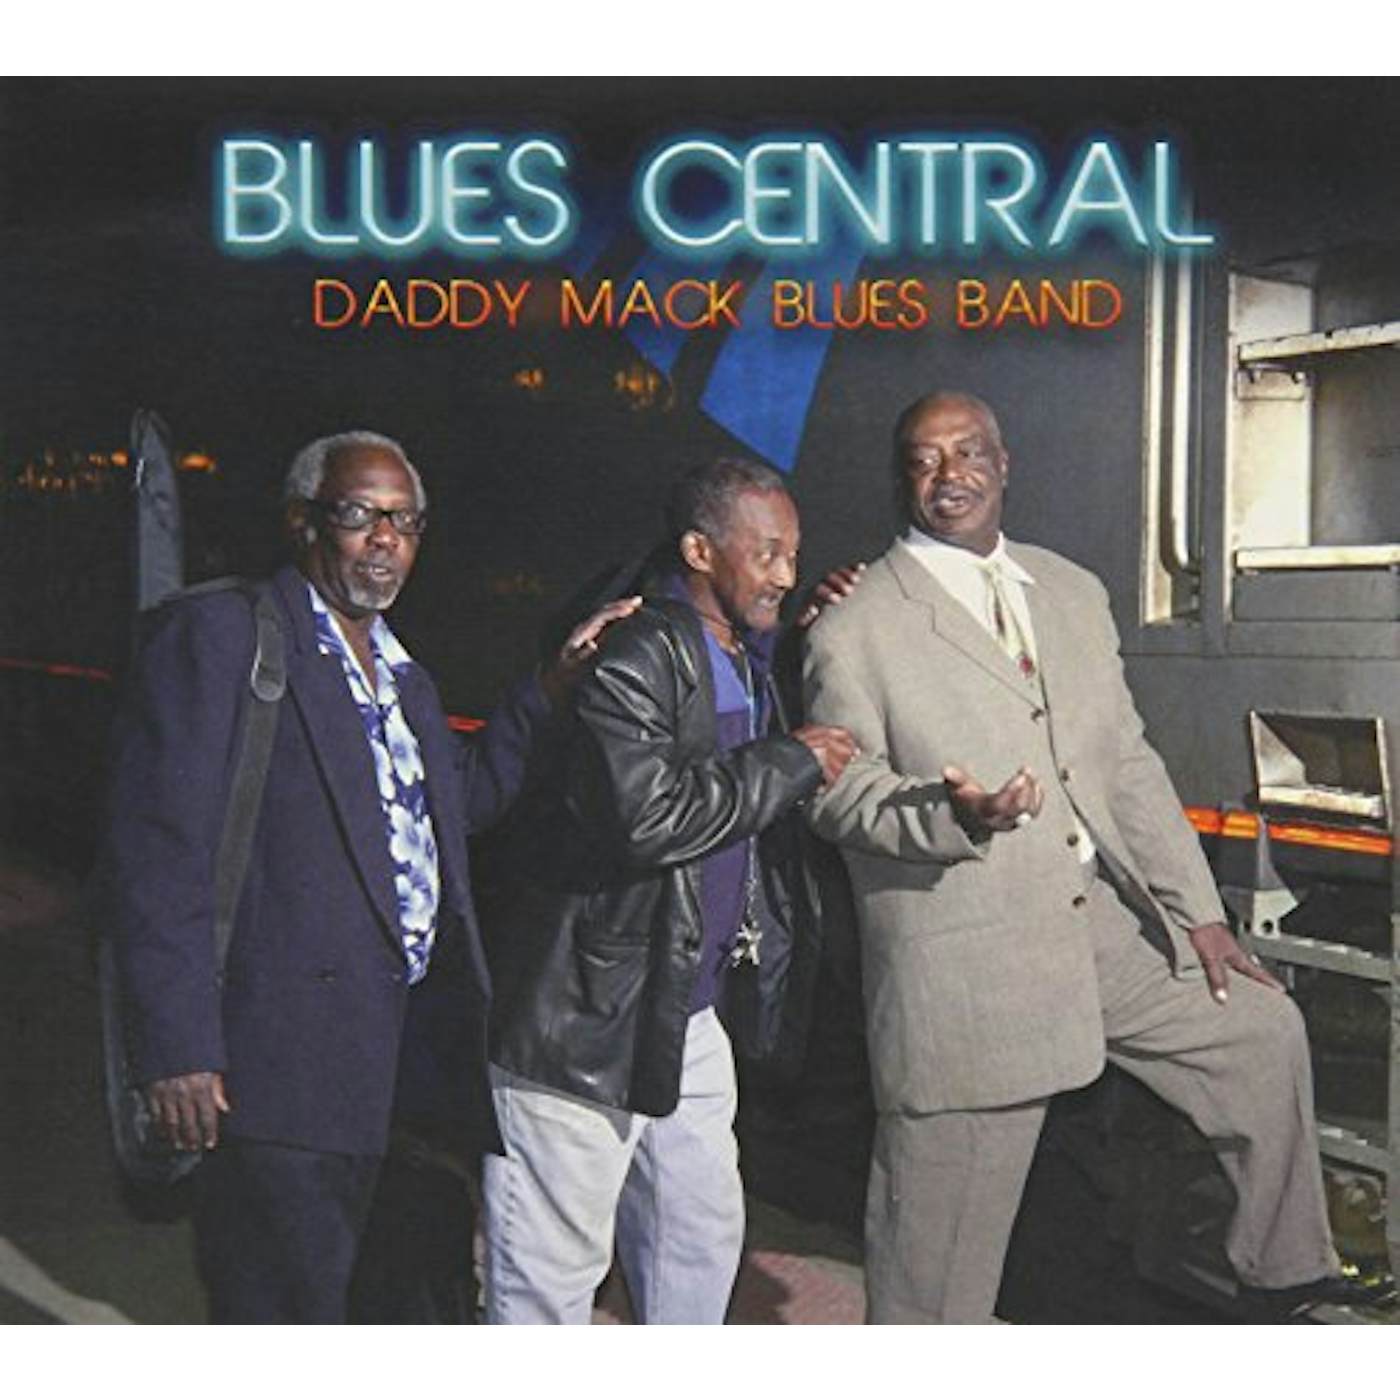 Daddy Mack Blues Band BLUES CENTRAL CD